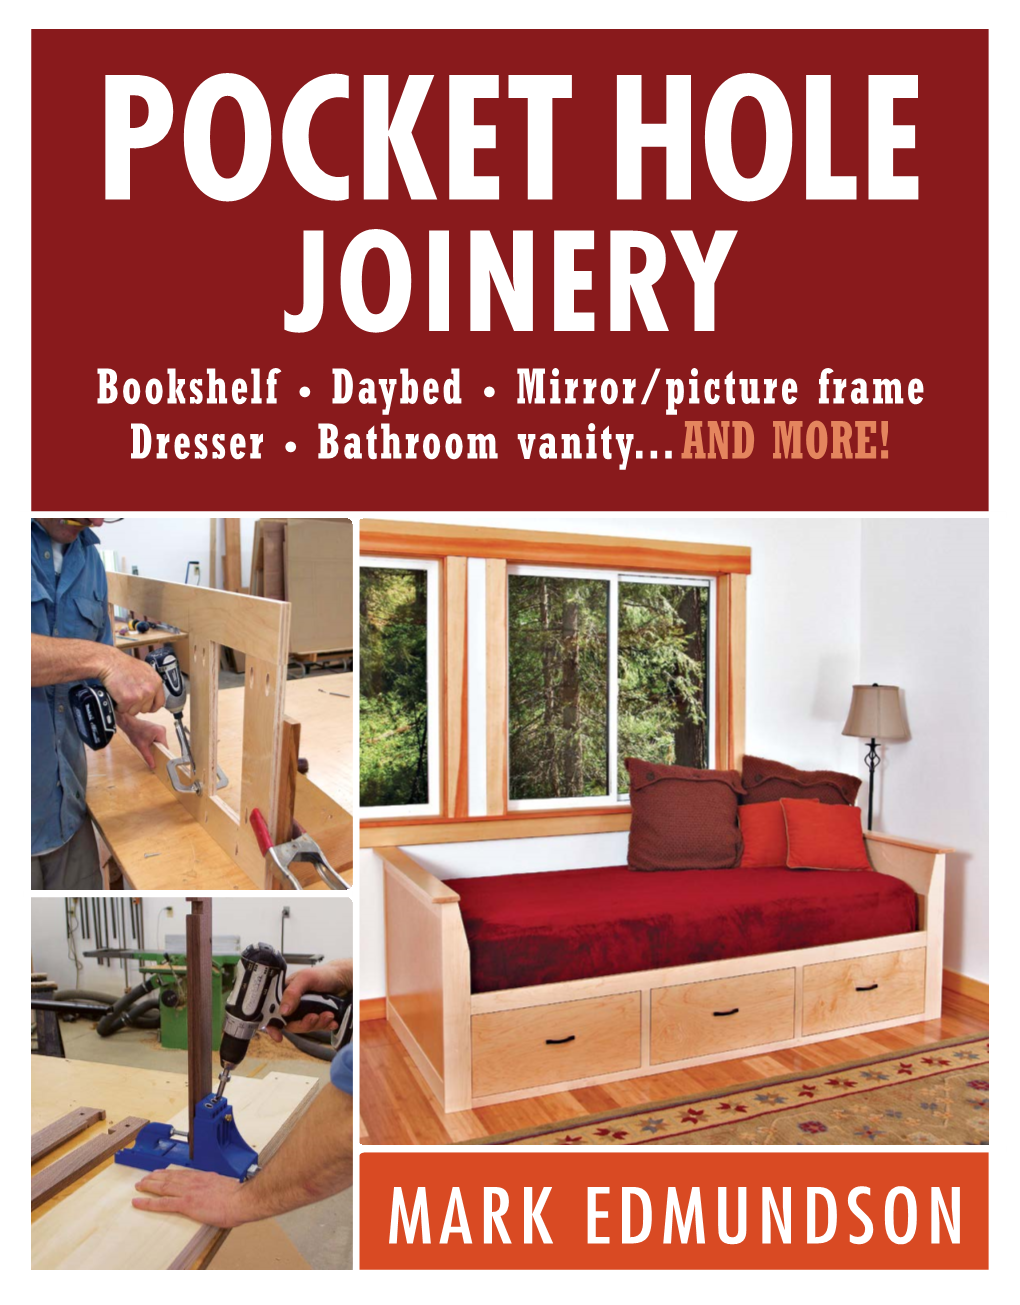 Pocket Hole Joinery Bookshelf • Daybed • Mirror/Picture Frame Dresser • Bathroom Vanity...And More!